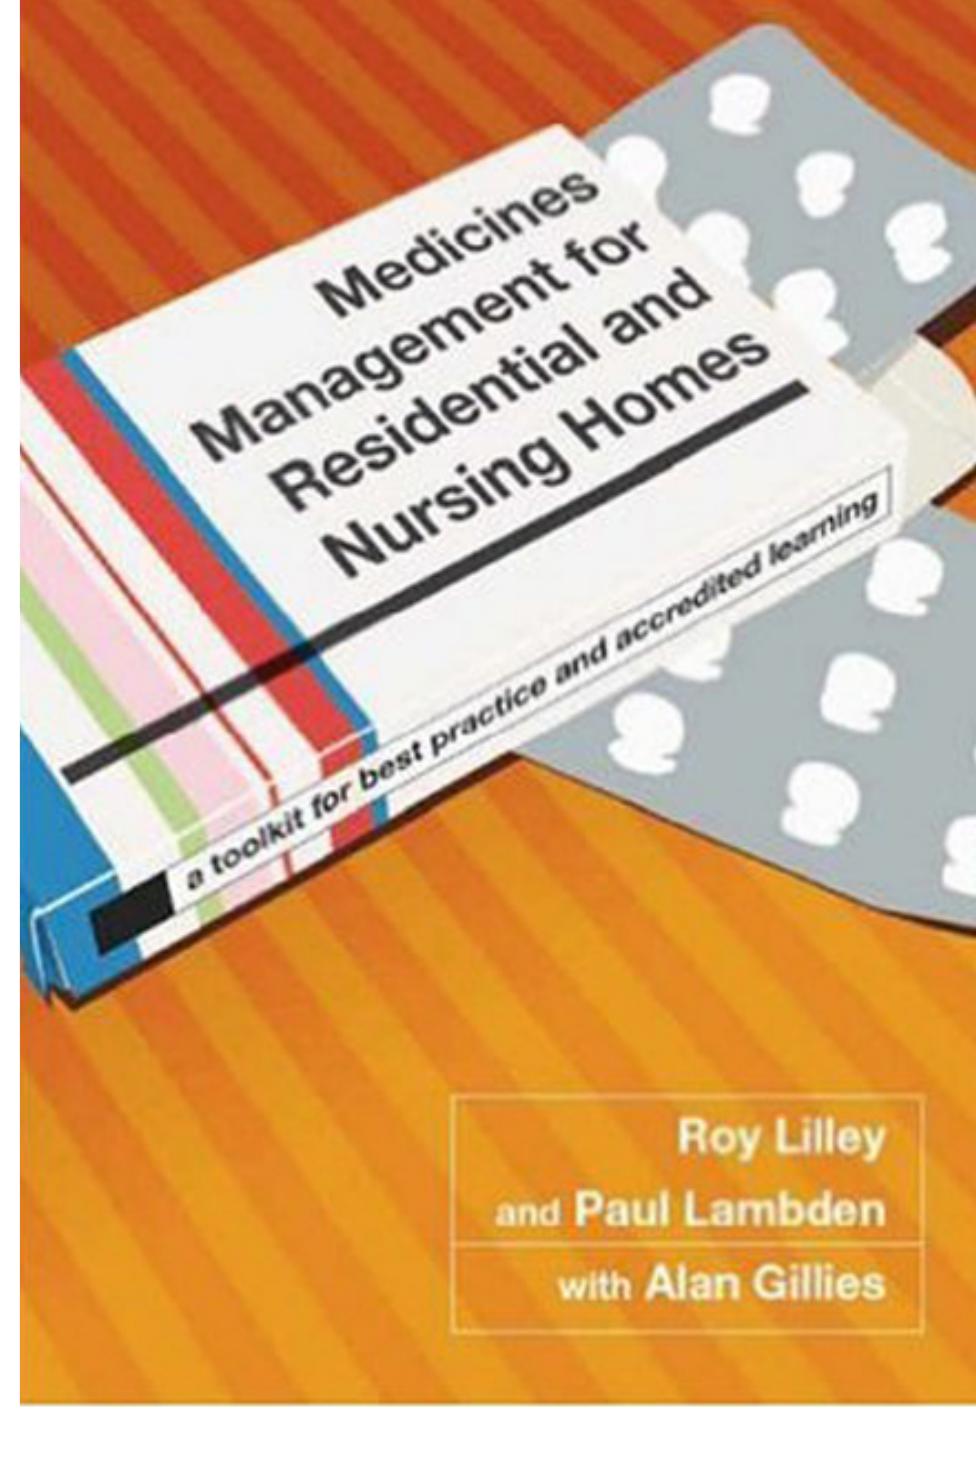 Medicines Management for Residential and Nursing Homes  a Toolkit for Best Practice and Accredited Learning (2017)